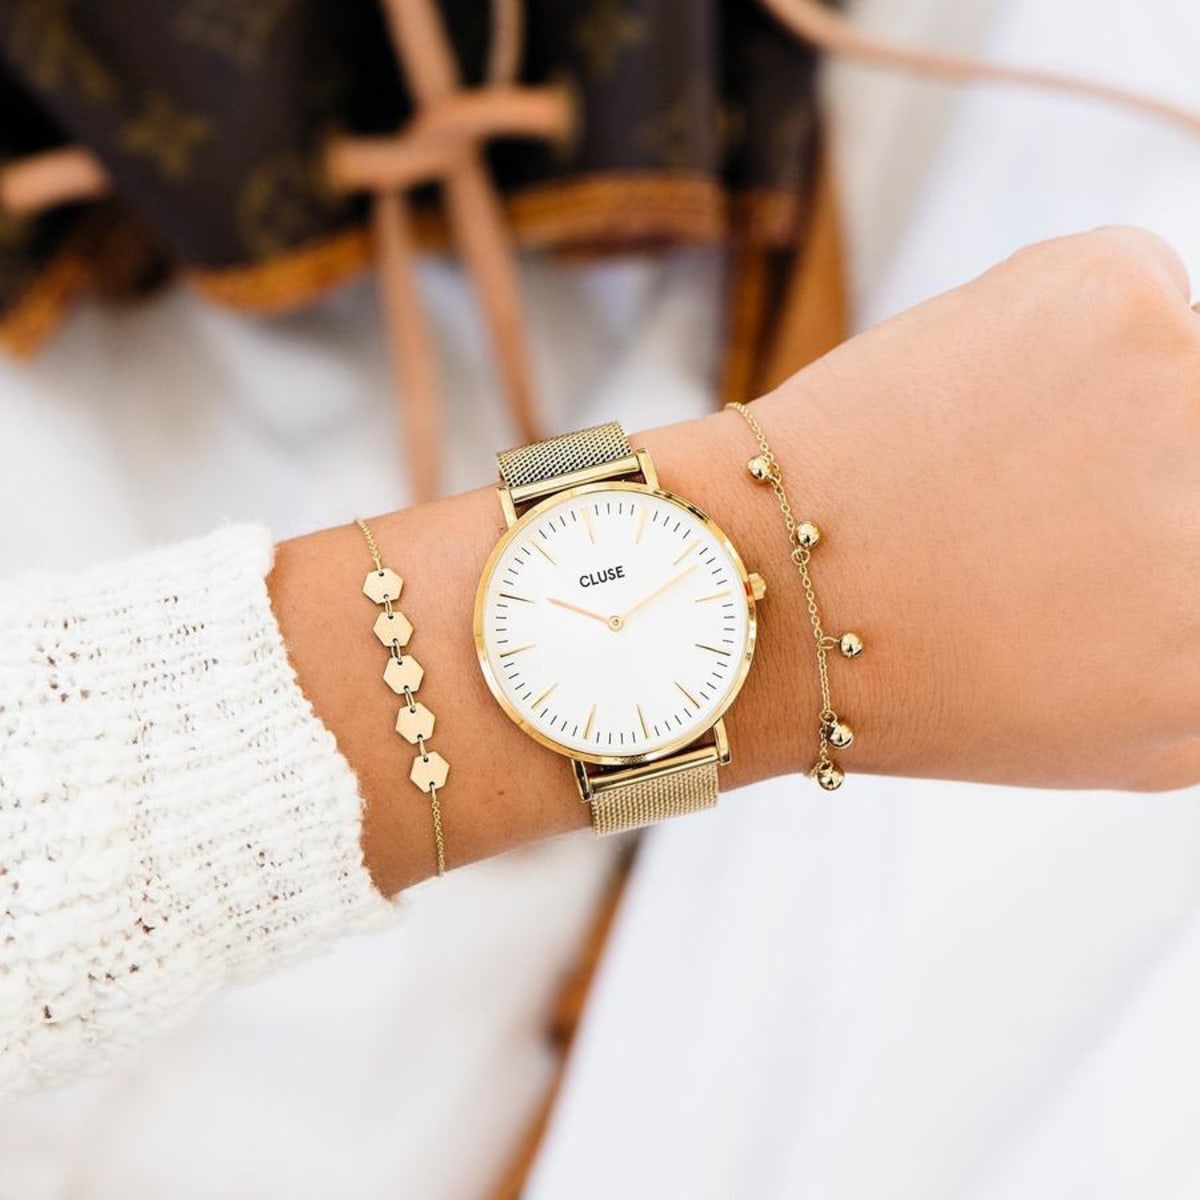 Elegant and Royal, this CLUSE watch is the perfect statement to accessorise your winter wardrobe. With a 38mm diameter case and 18mm strap width, this is the larger size in the CLUSE range.